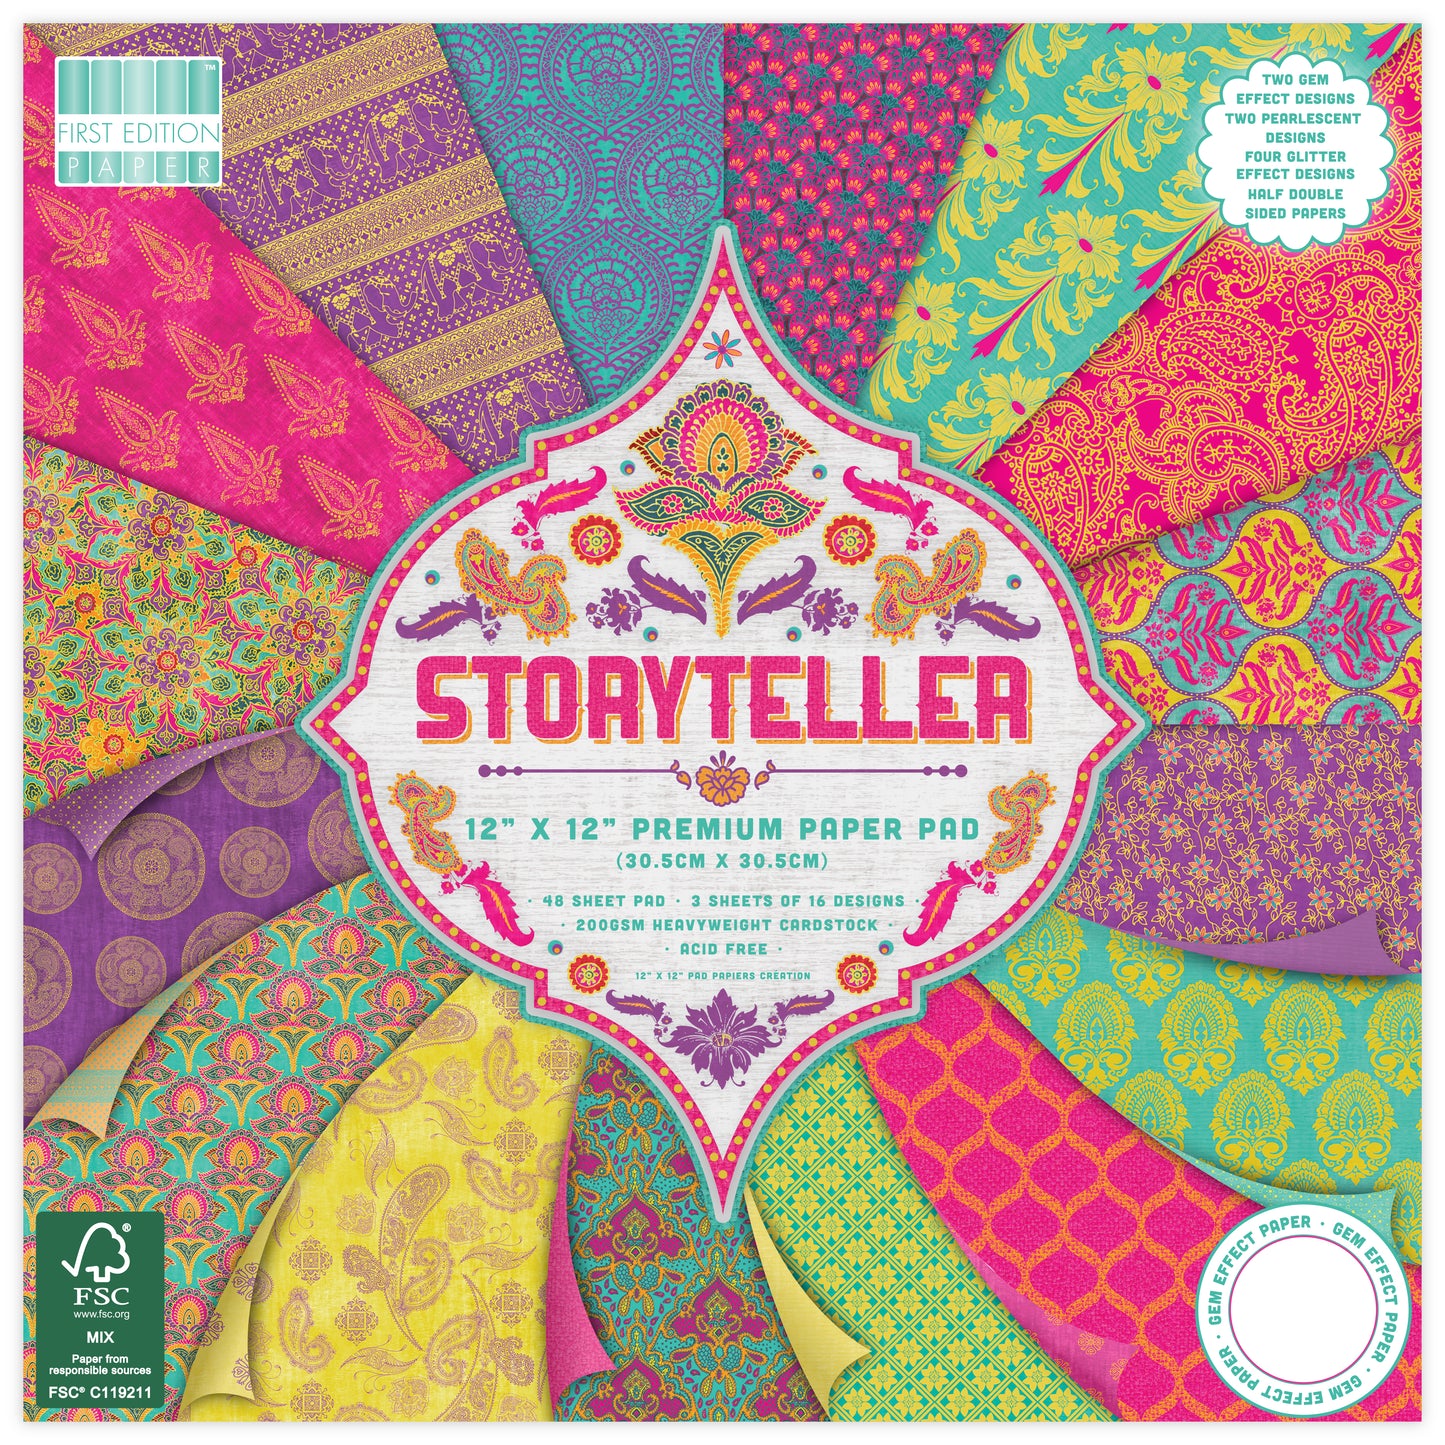 First Edition Storyteller Paper Pad 12" x 12"